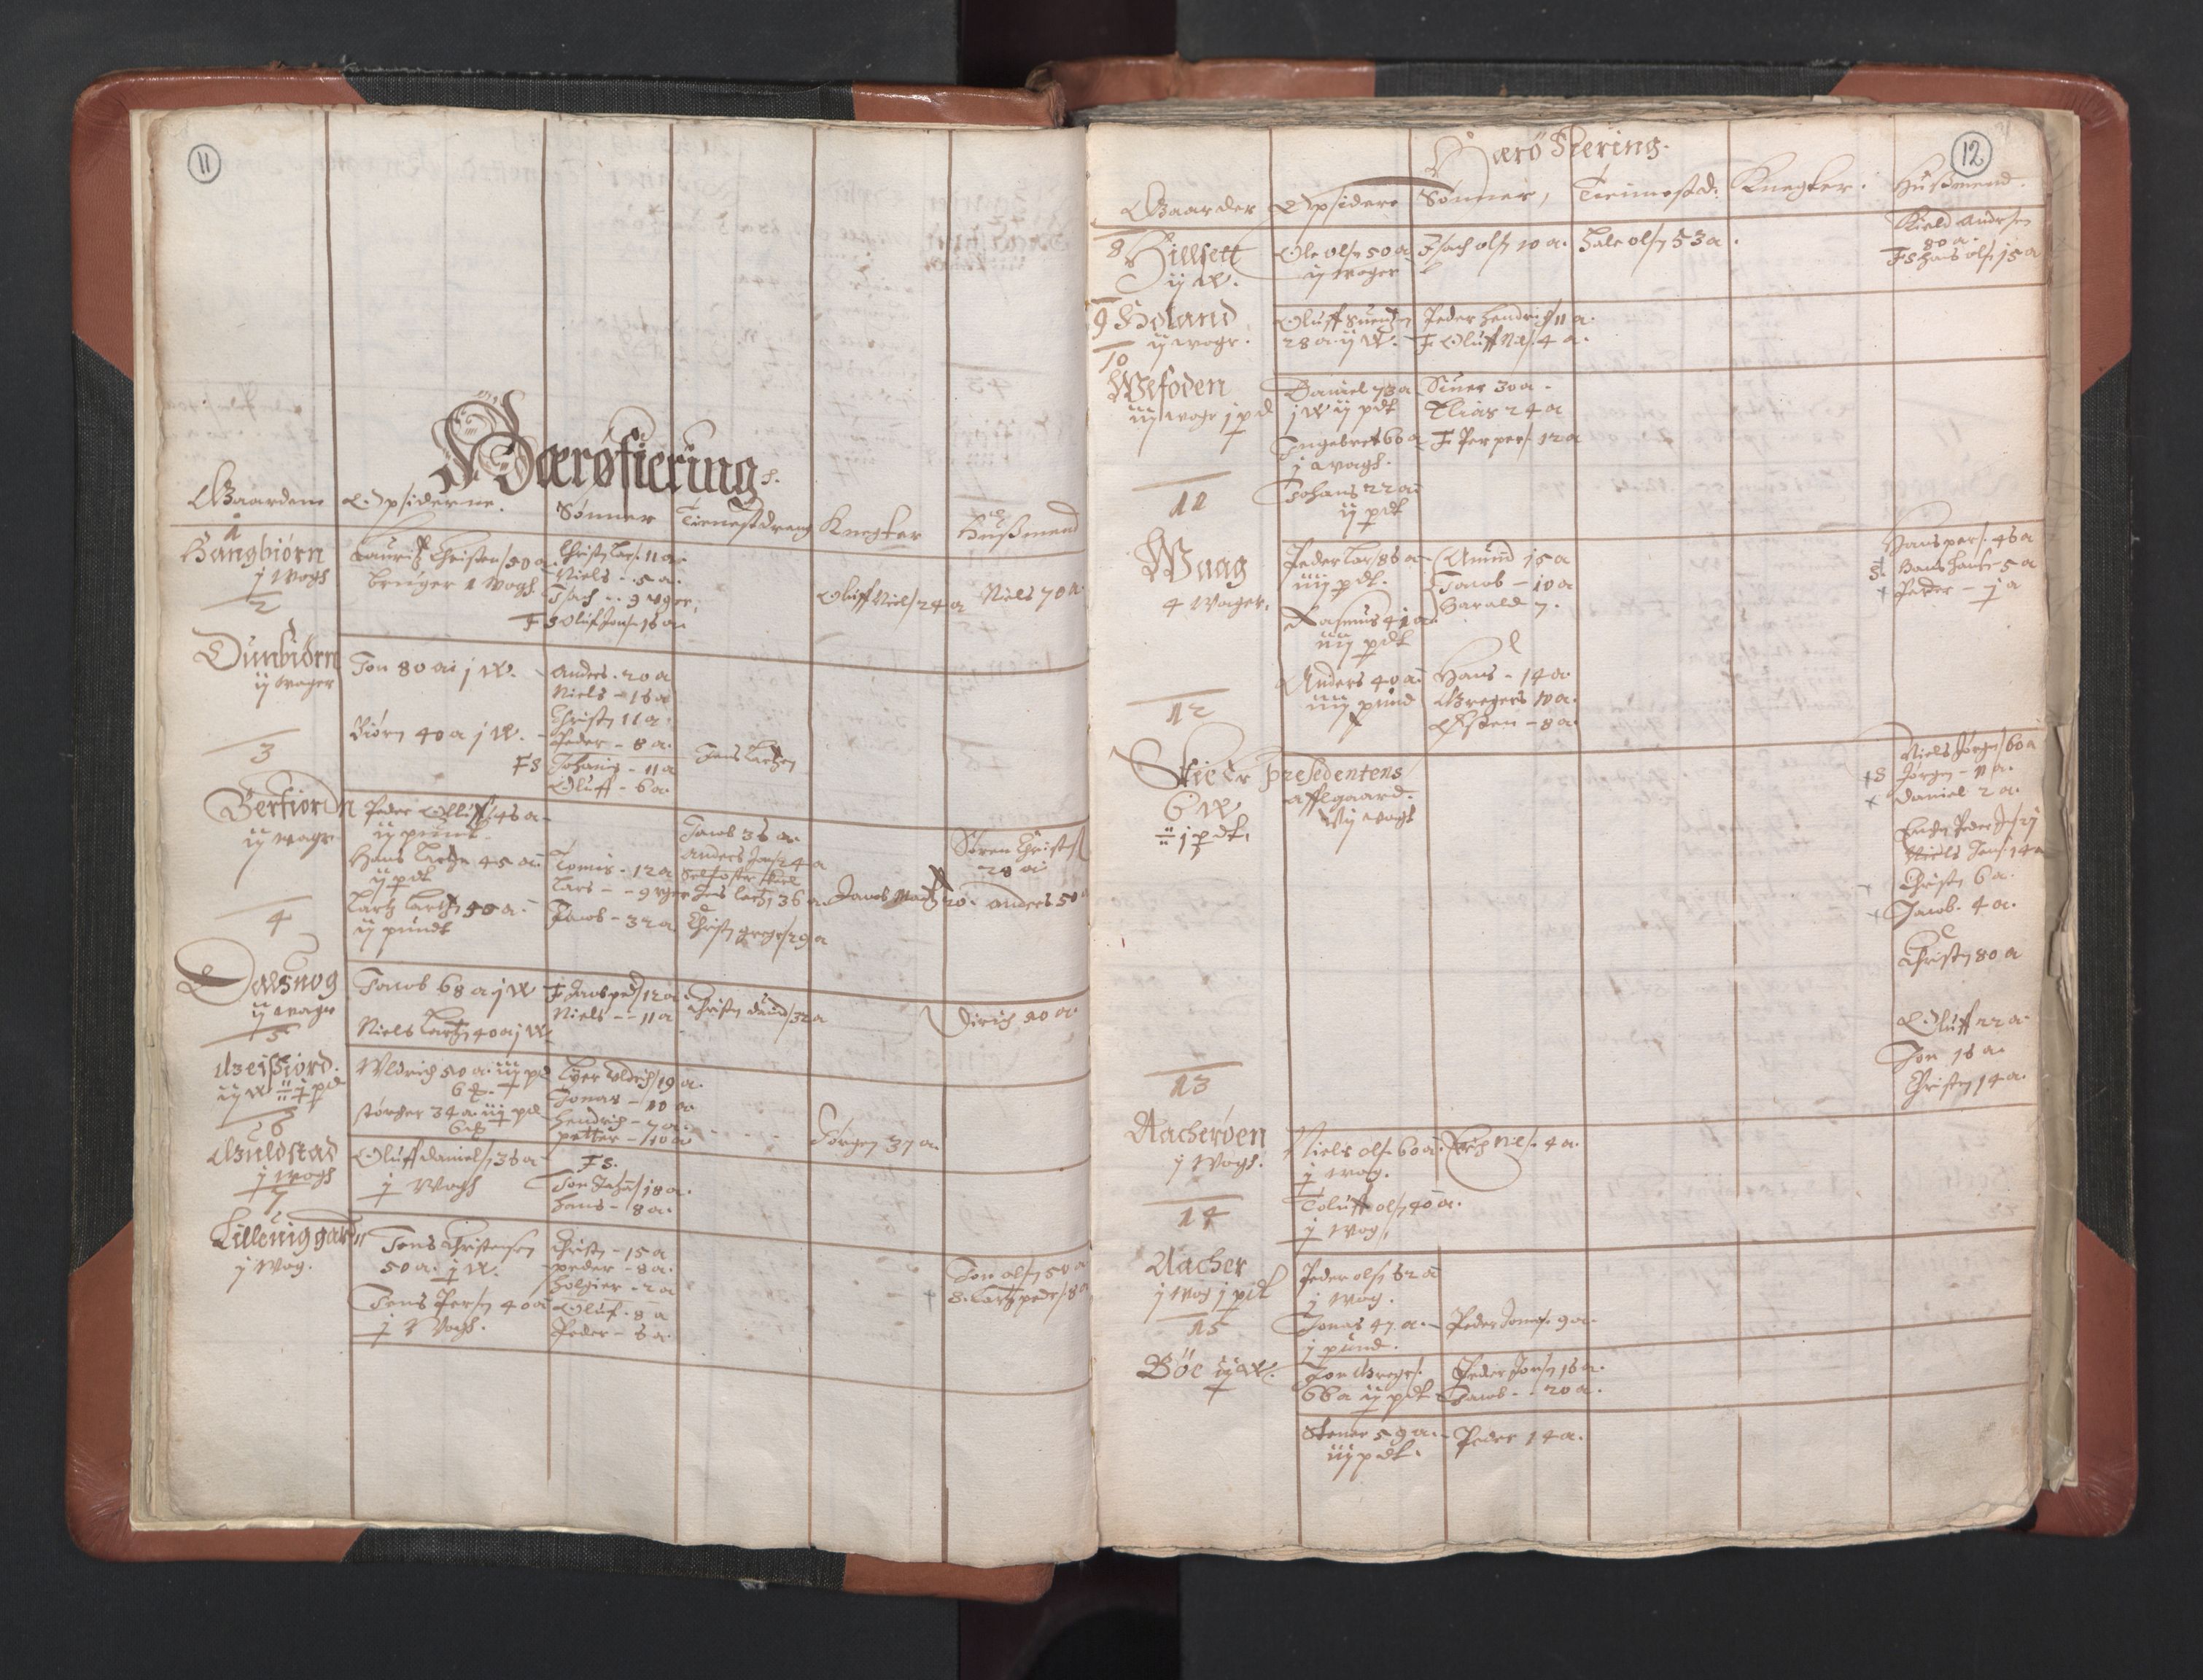 RA, Vicar's Census 1664-1666, no. 35: Helgeland deanery and Salten deanery, 1664-1666, p. 11-12